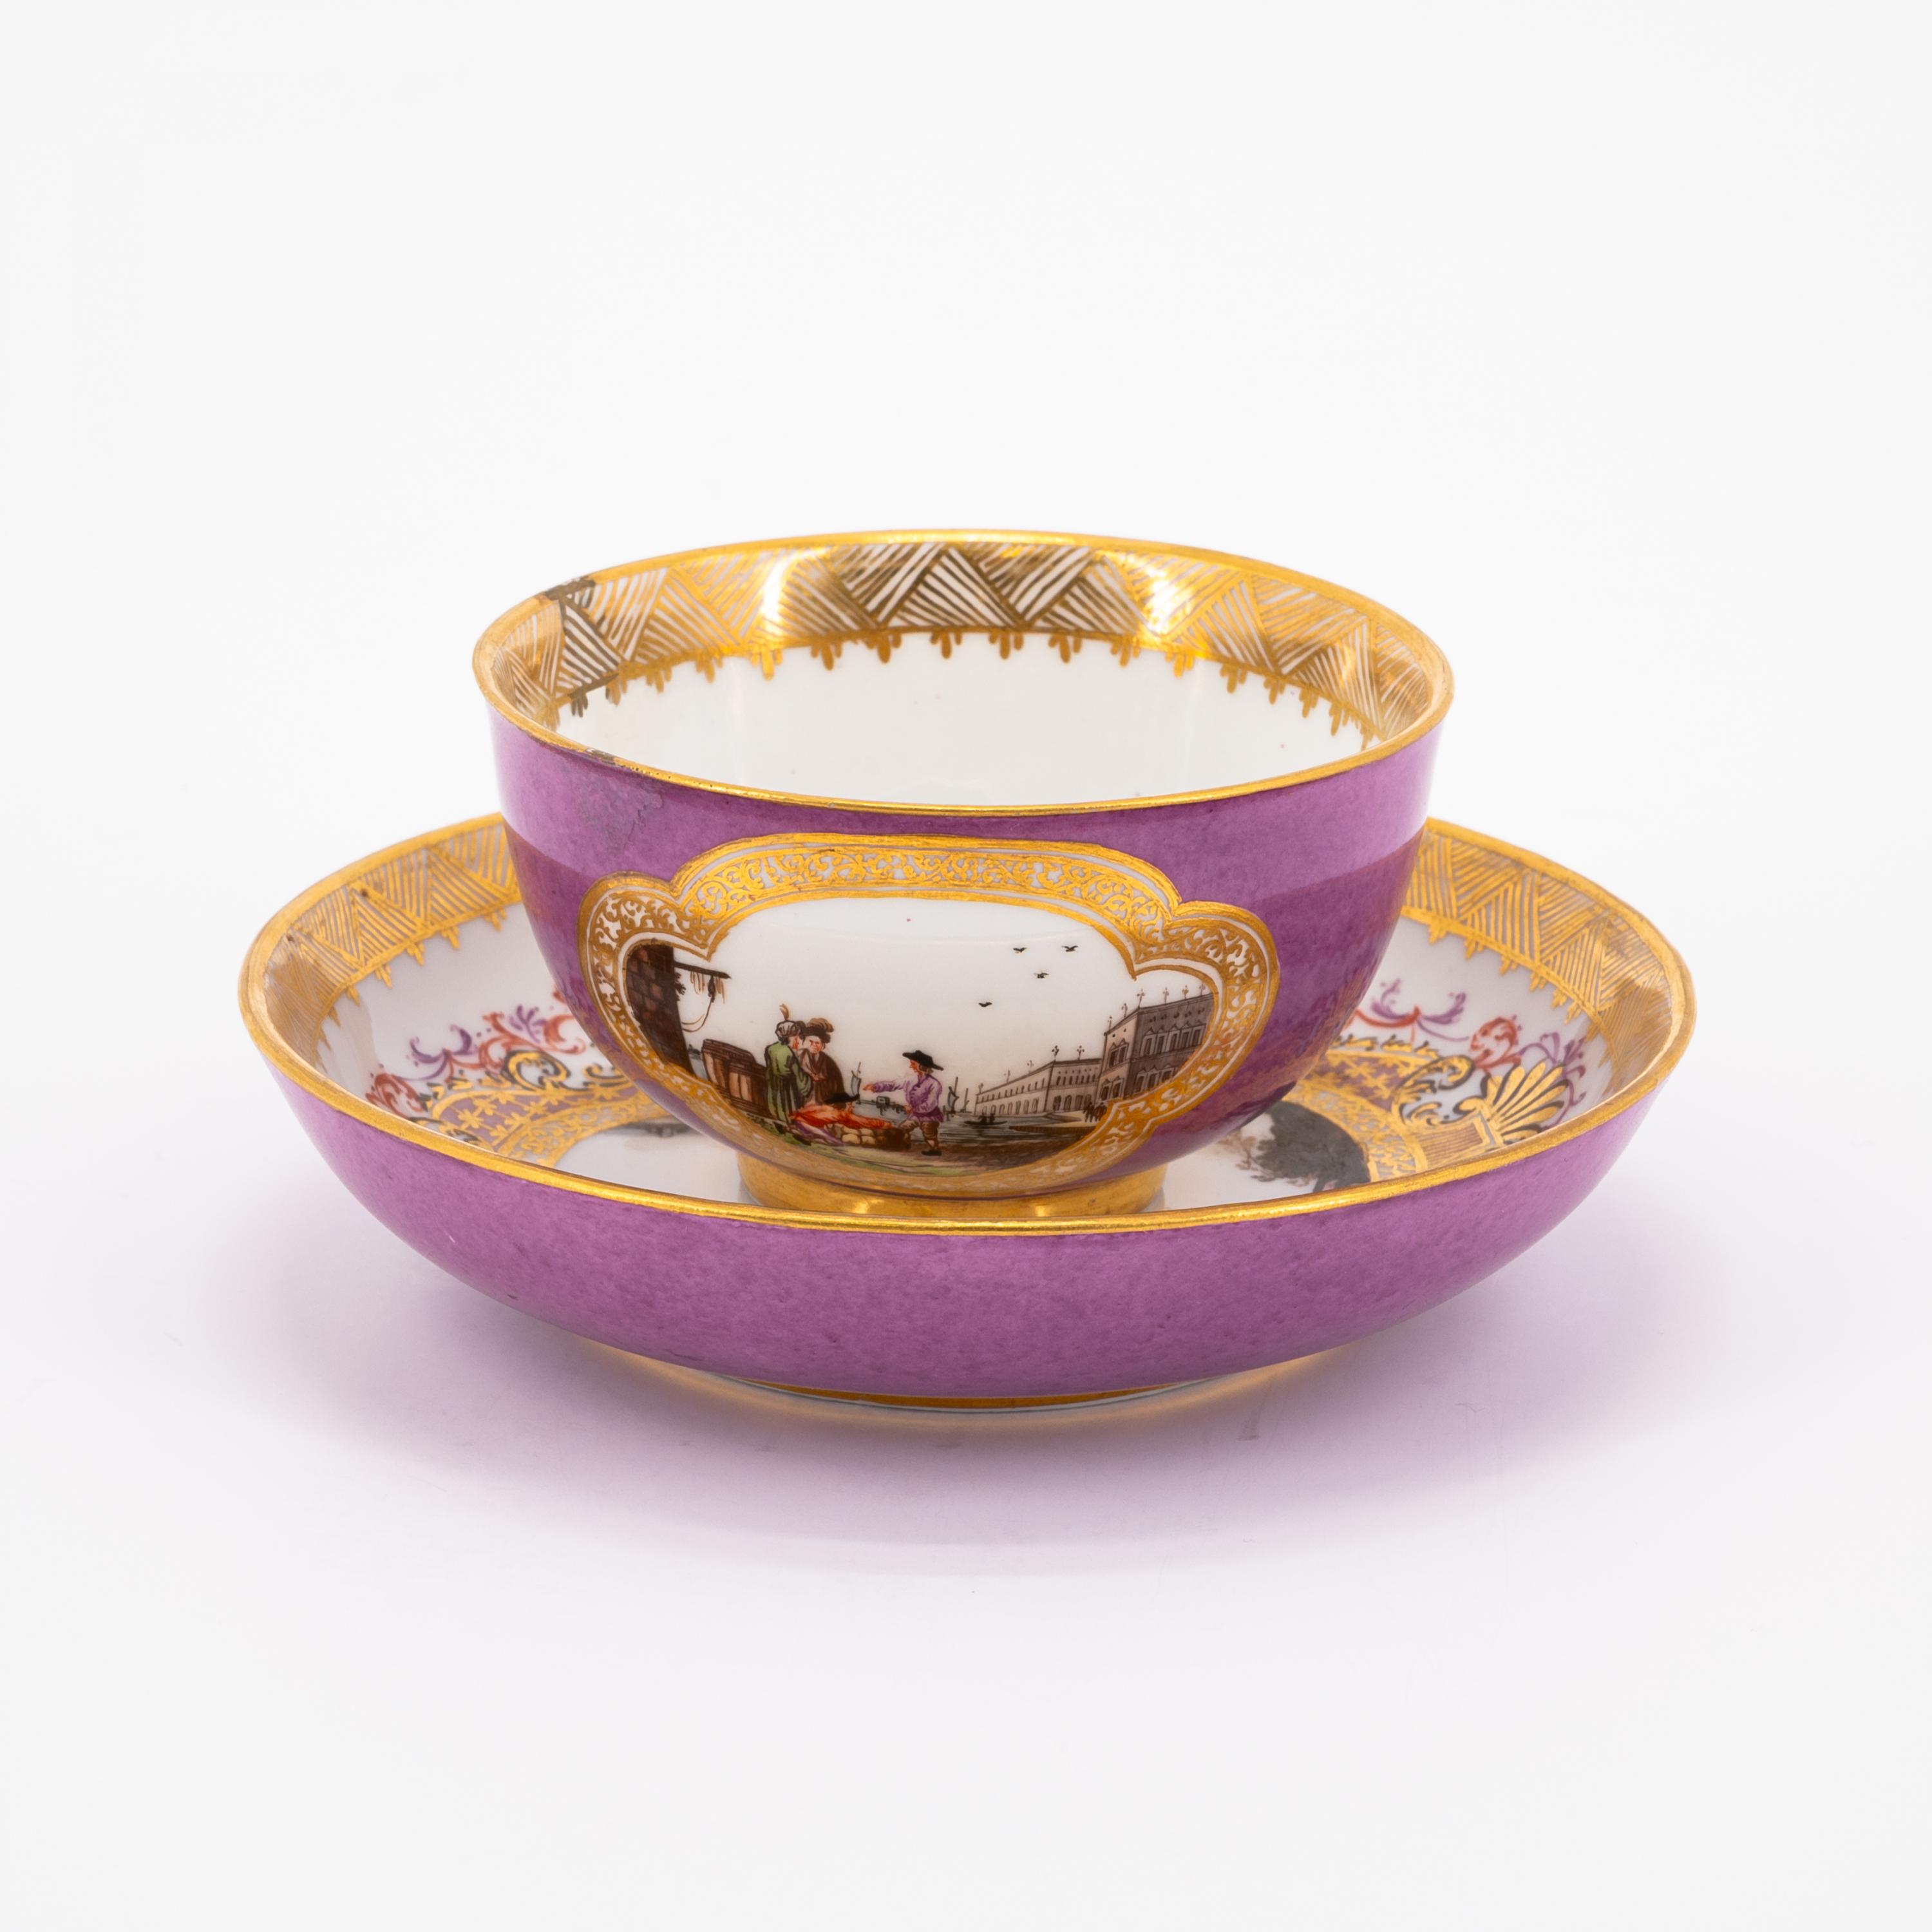 TWO PORCELAIN TEA BOWLS AND TWO SAUCER WITH PURPLE FOND AND MERCHANT NAVY SCENE - Image 8 of 11